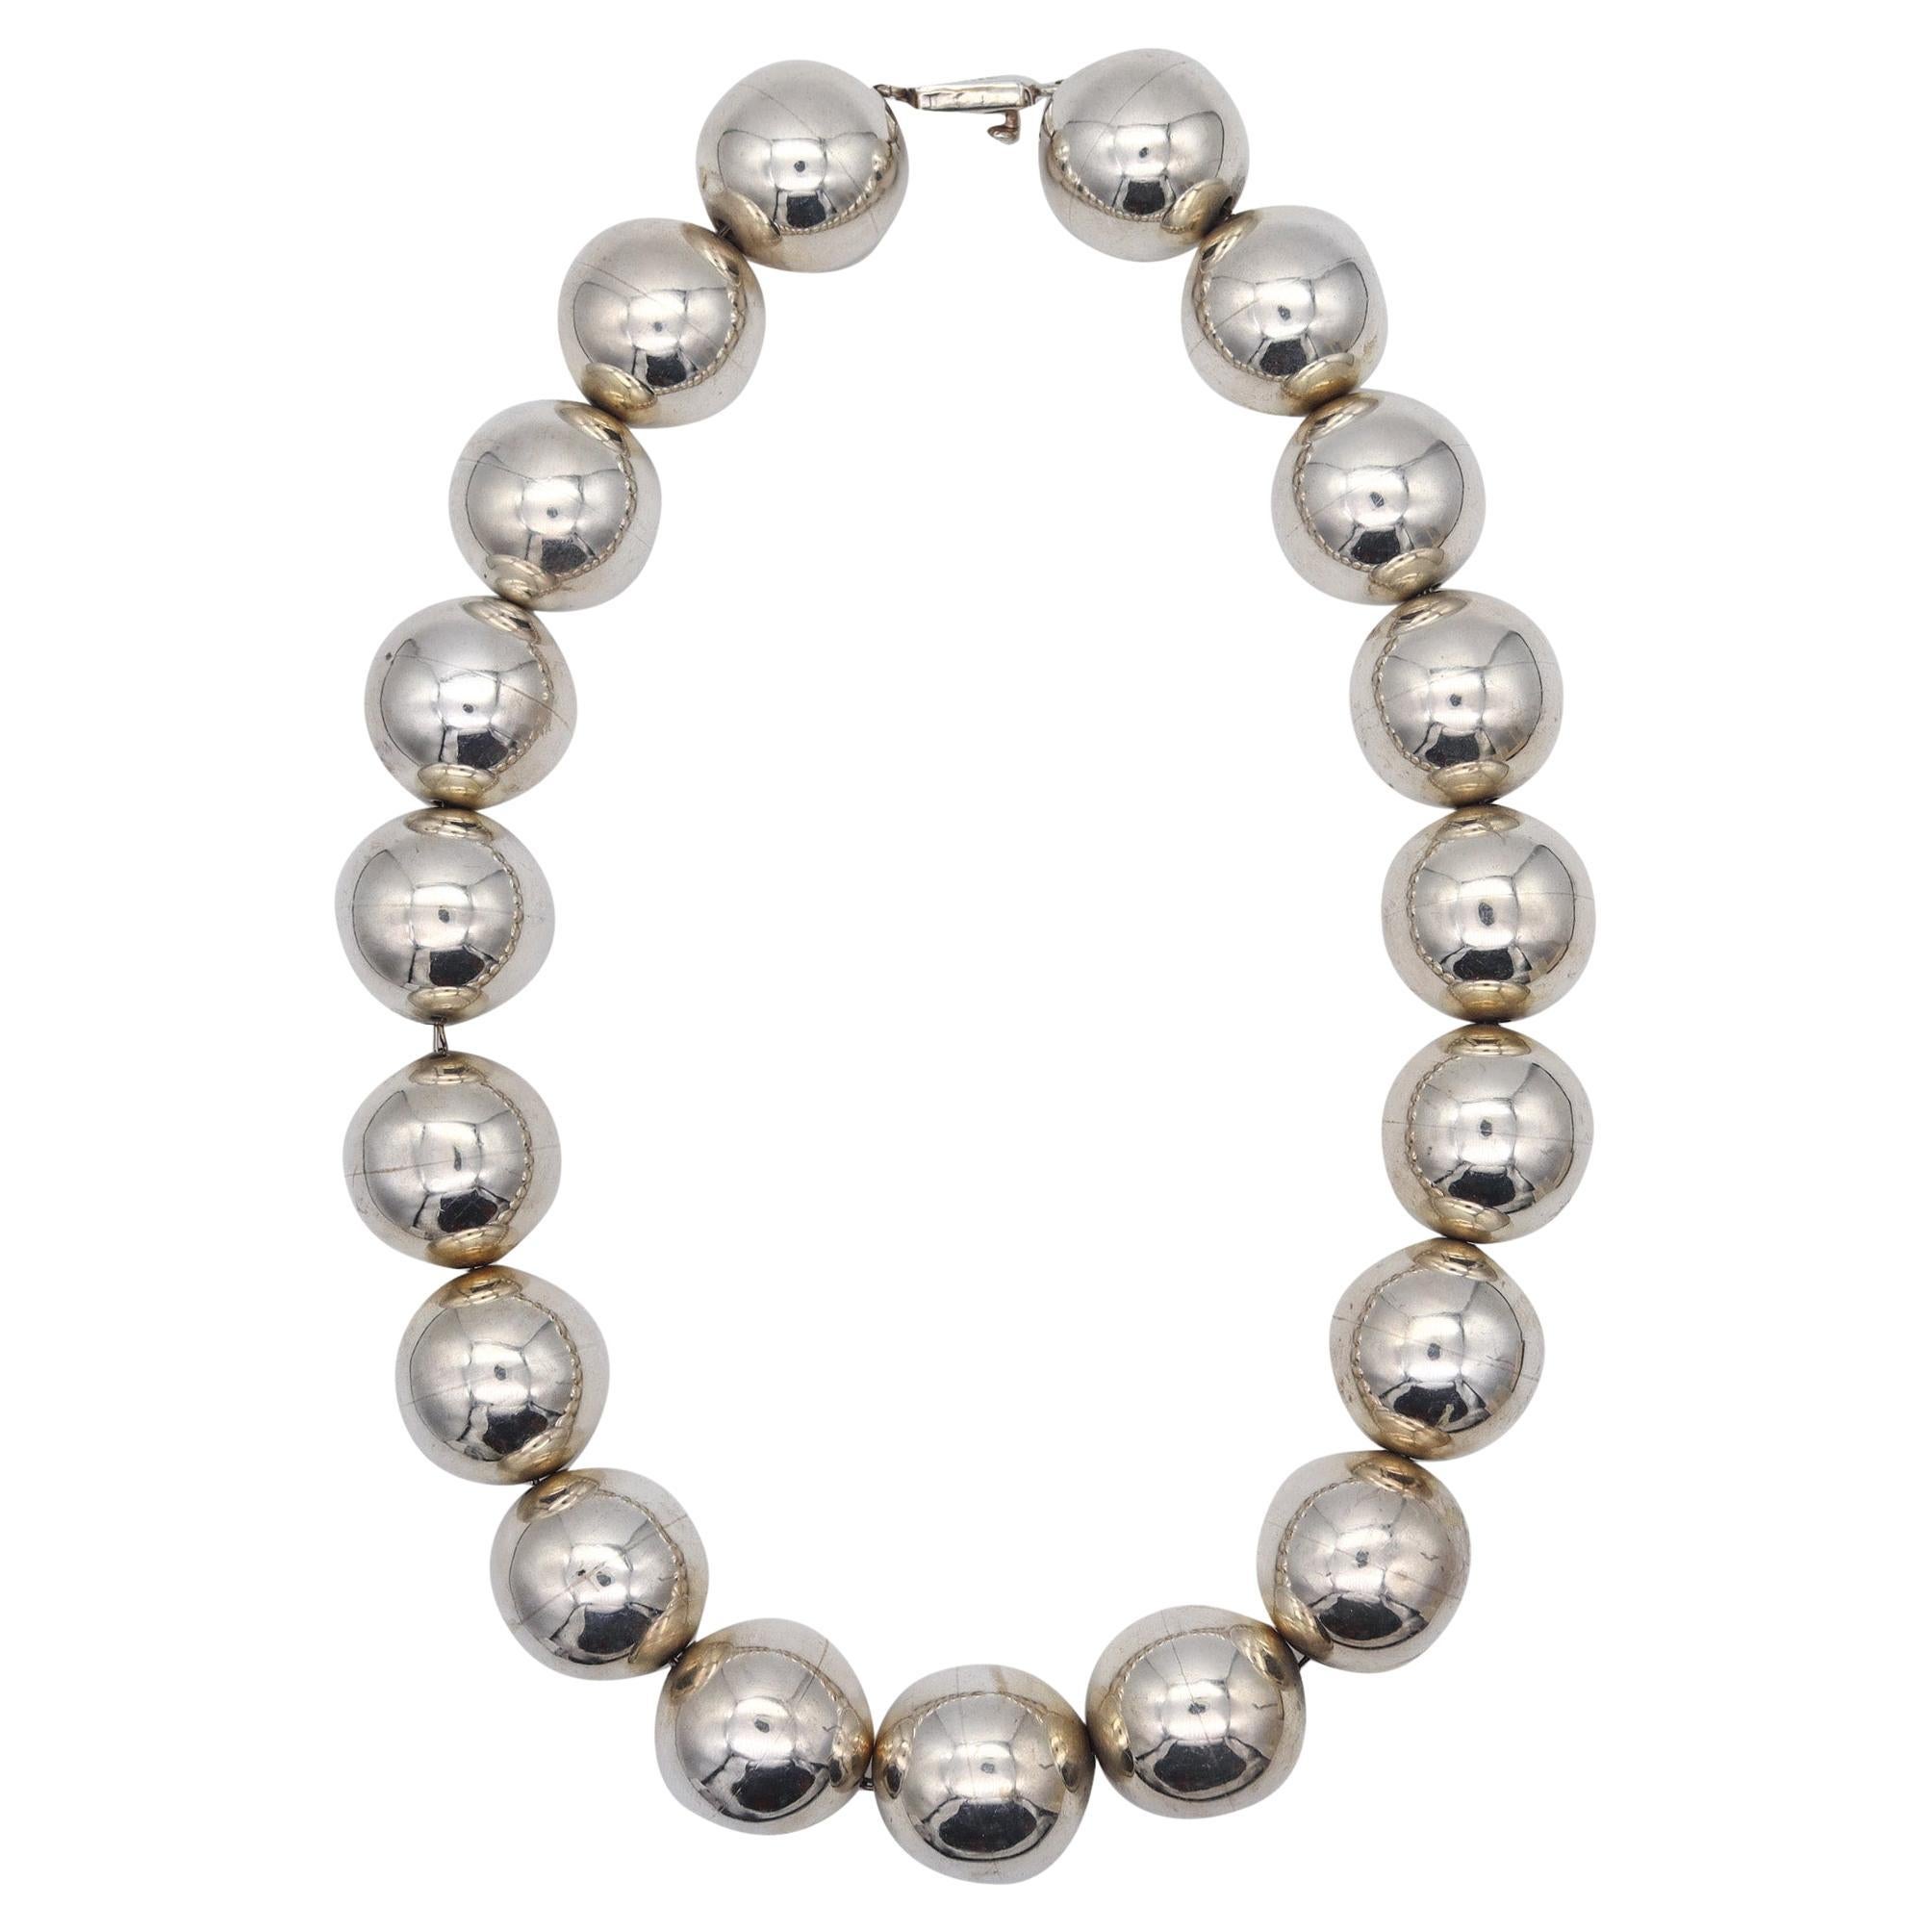 Mexico 1970 Modernist Spherical Balls Necklace in Solid .925 Sterling Silver For Sale